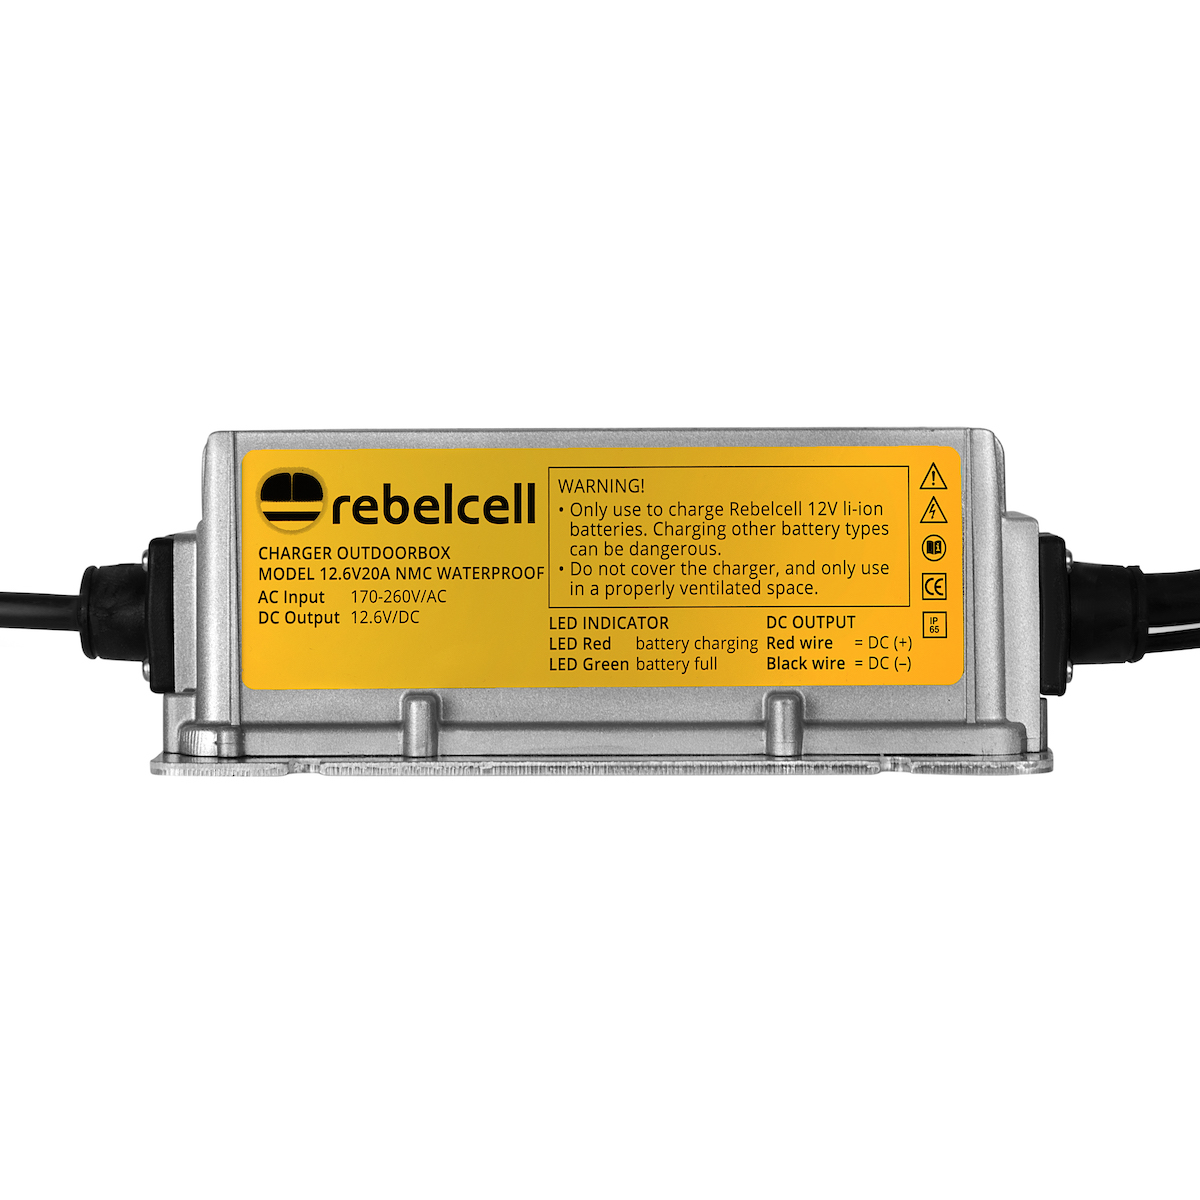 Rebelcell waterproof charger 12.6V20A product image